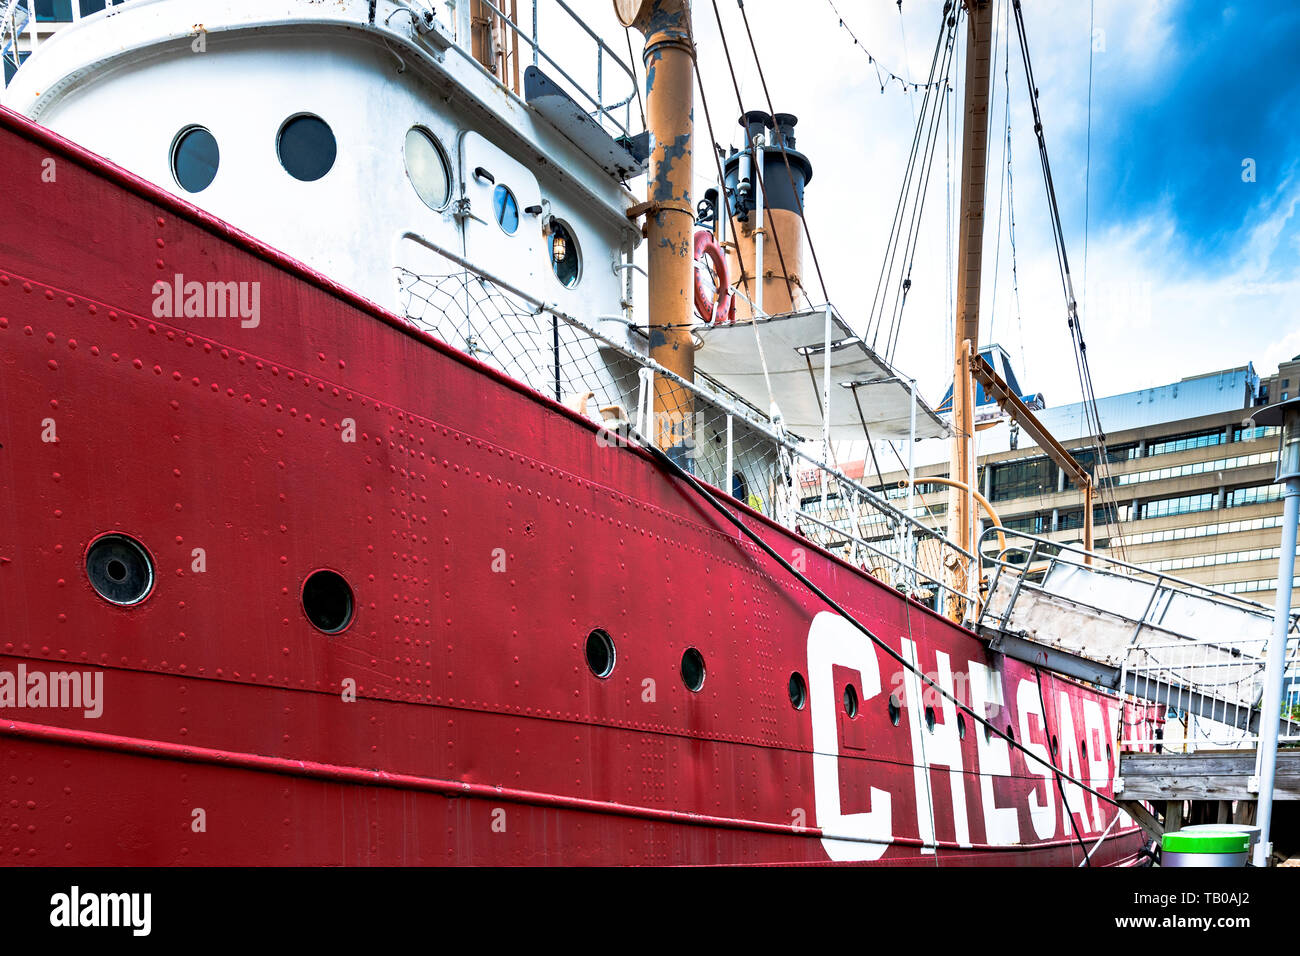 Baltimore, Maryland, USA - July 10, 2017: Looking down the hull of the Lightship Chesapeake, a museum ship owned by the National Park Service. Stock Photo